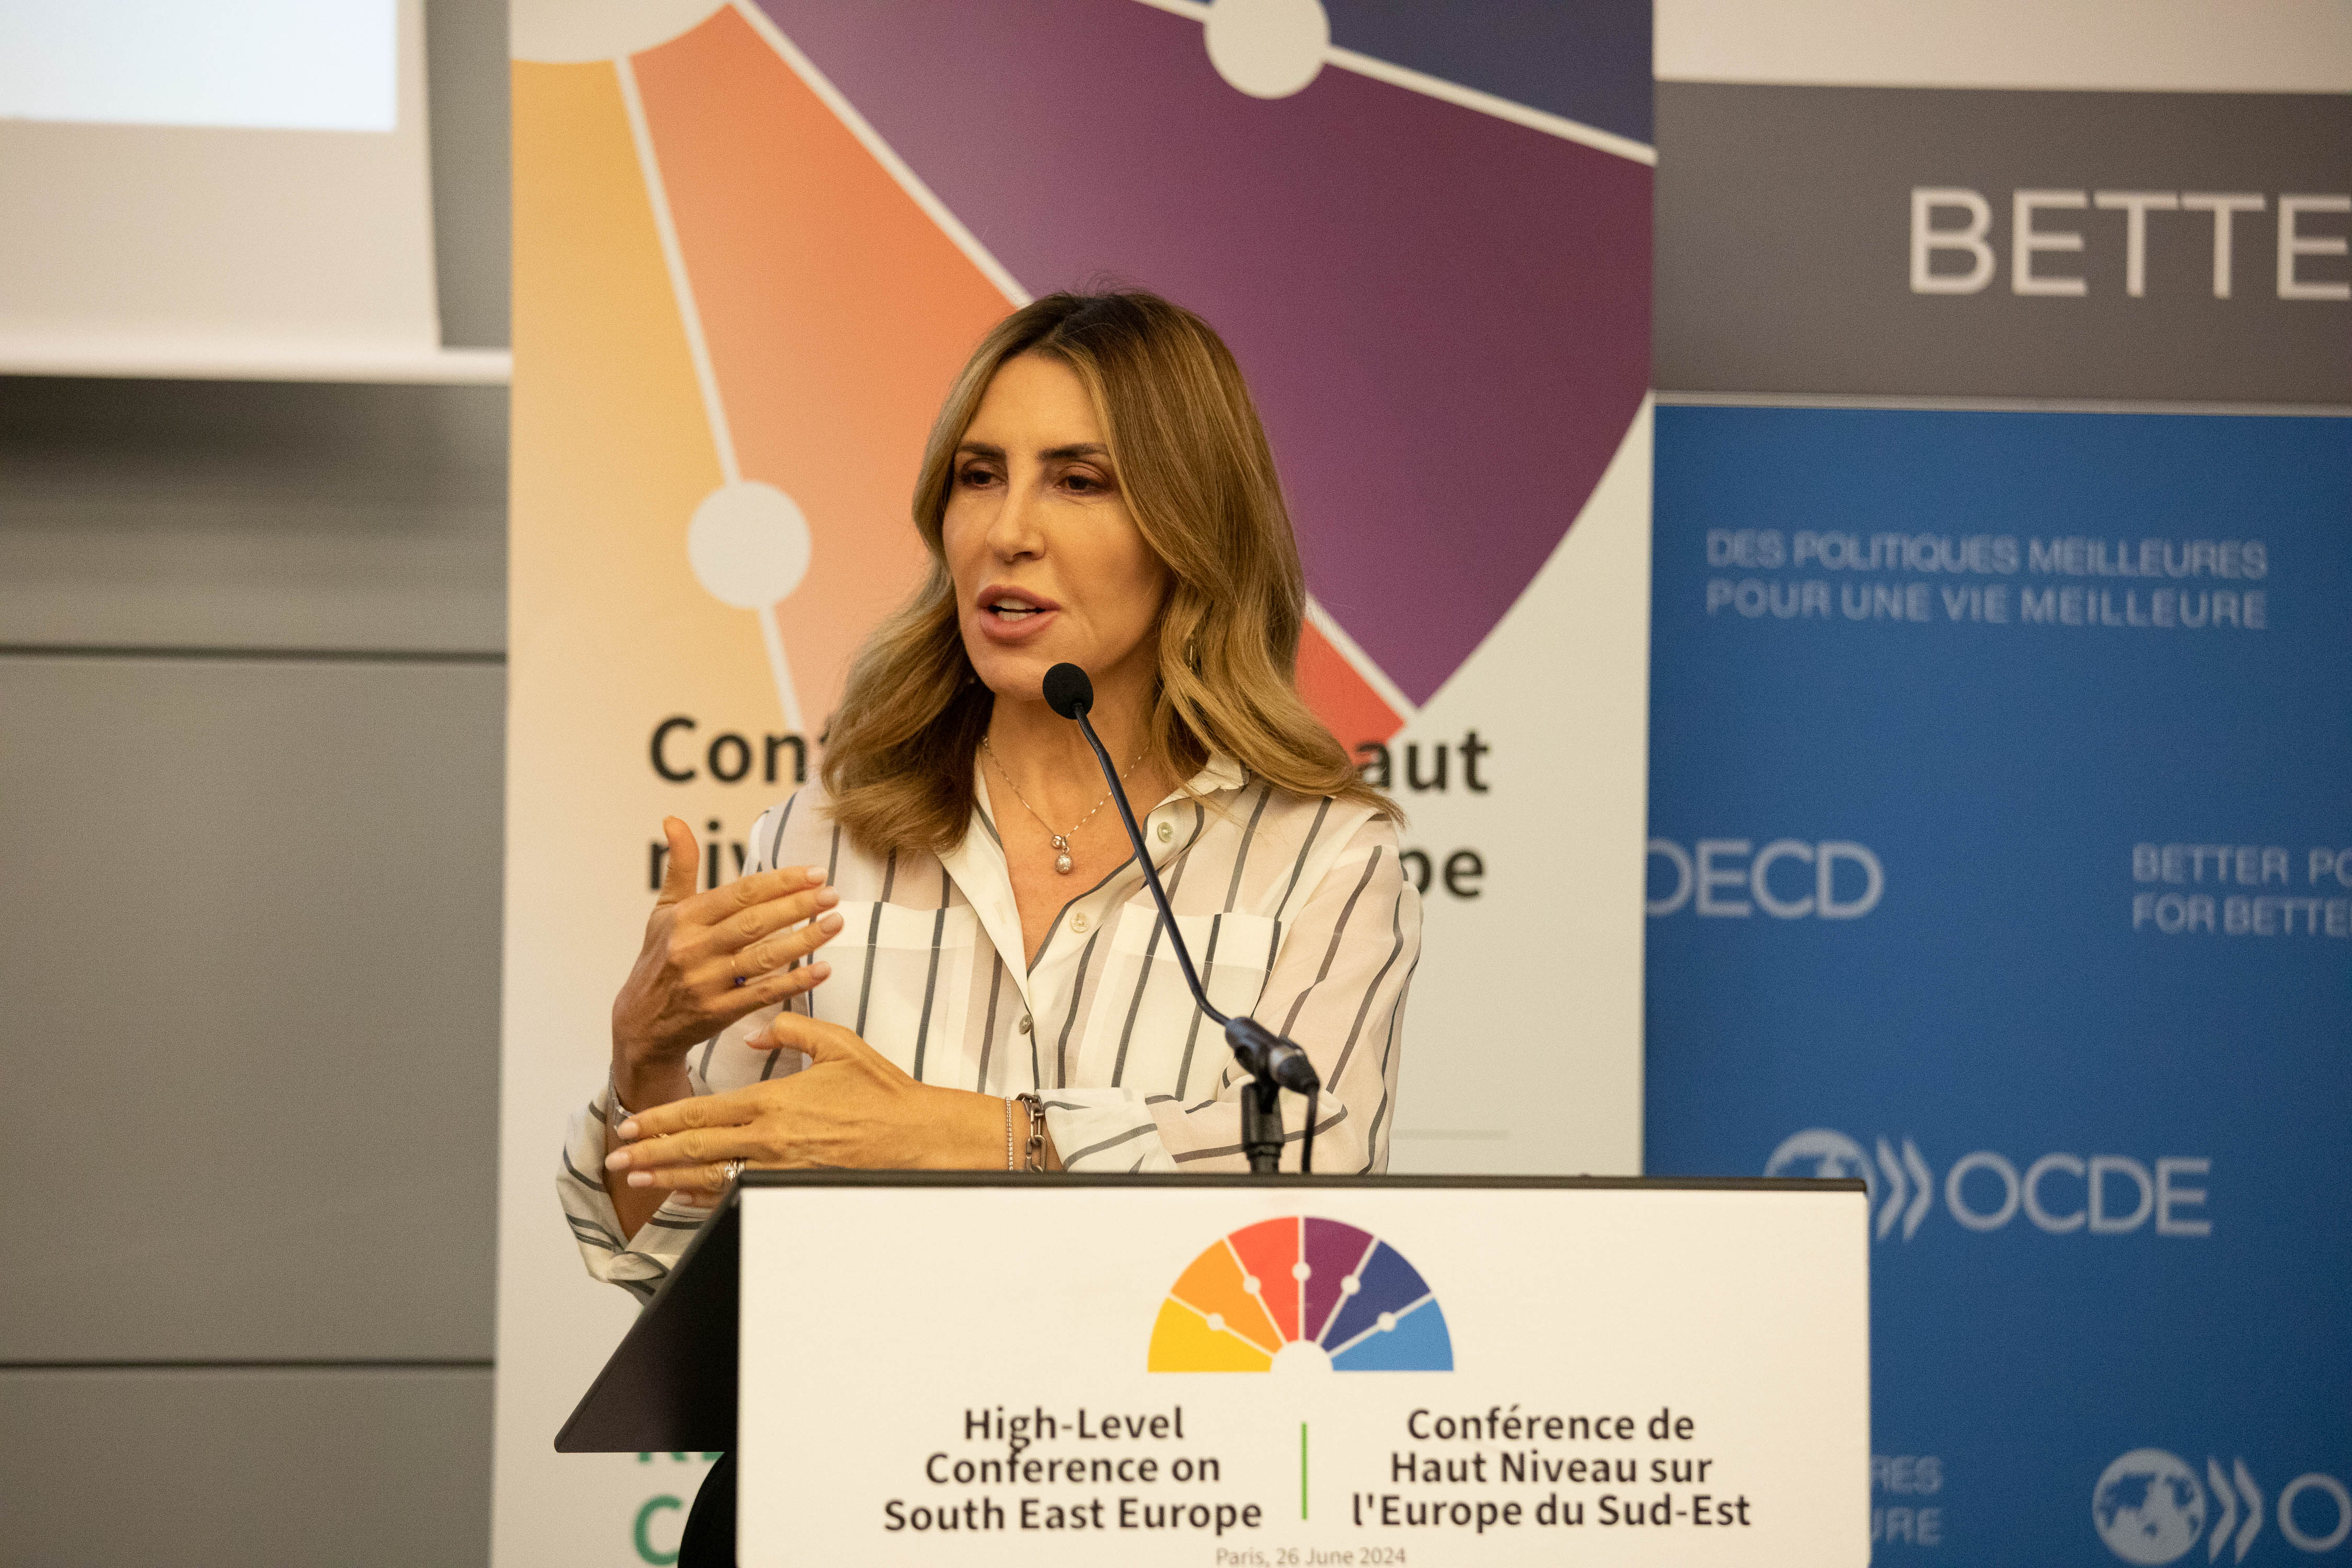 RCC Secretary General at the OECD High-Level Conference on South East Europe